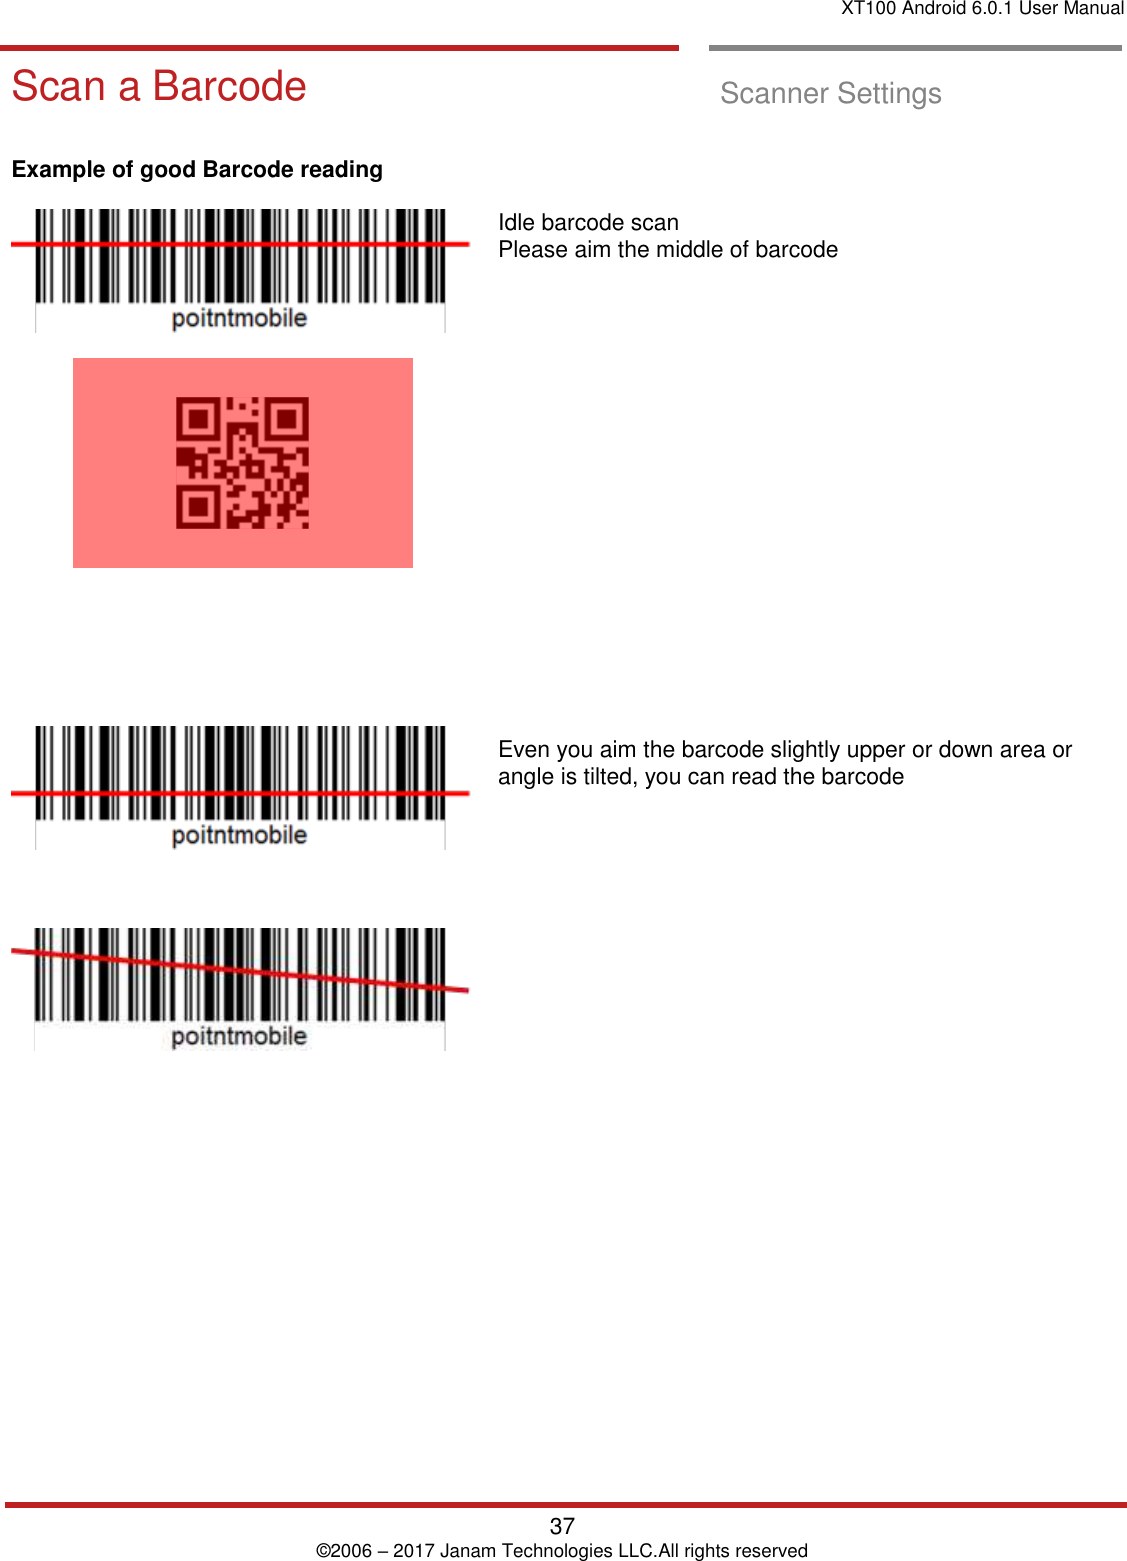 XT100 Android 6.0.1 User Manual   37 © 2006 – 2017 Janam Technologies LLC.All rights reserved  Scan a Barcode Scan a Barcode  Scanner Settings     Example of good Barcode reading                    Idle barcode scan  Please aim the middle of barcode                    Even you aim the barcode slightly upper or down area or angle is tilted, you can read the barcode            